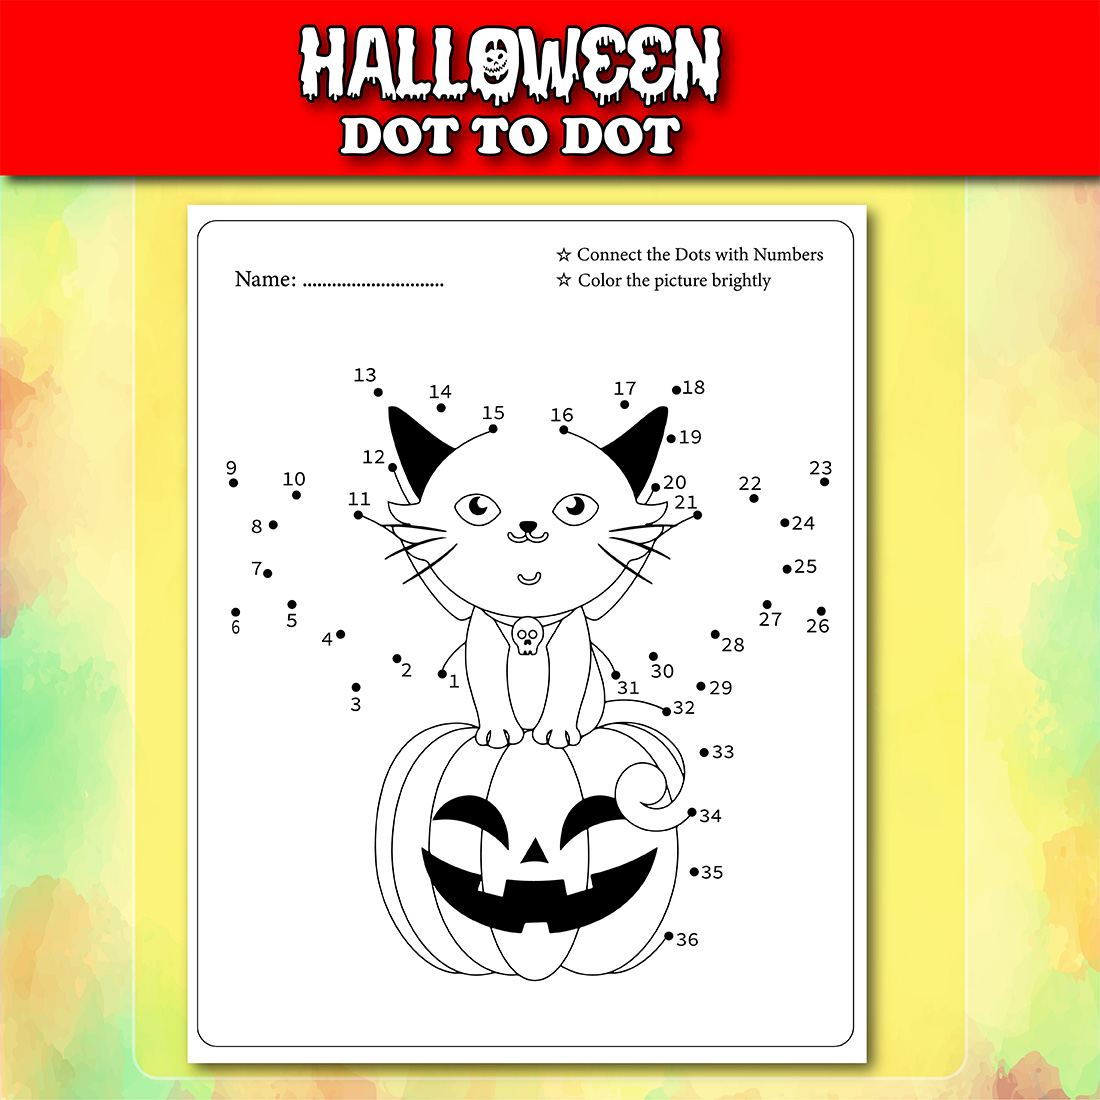 Halloween Dot To Dot For Kids Preview Image.